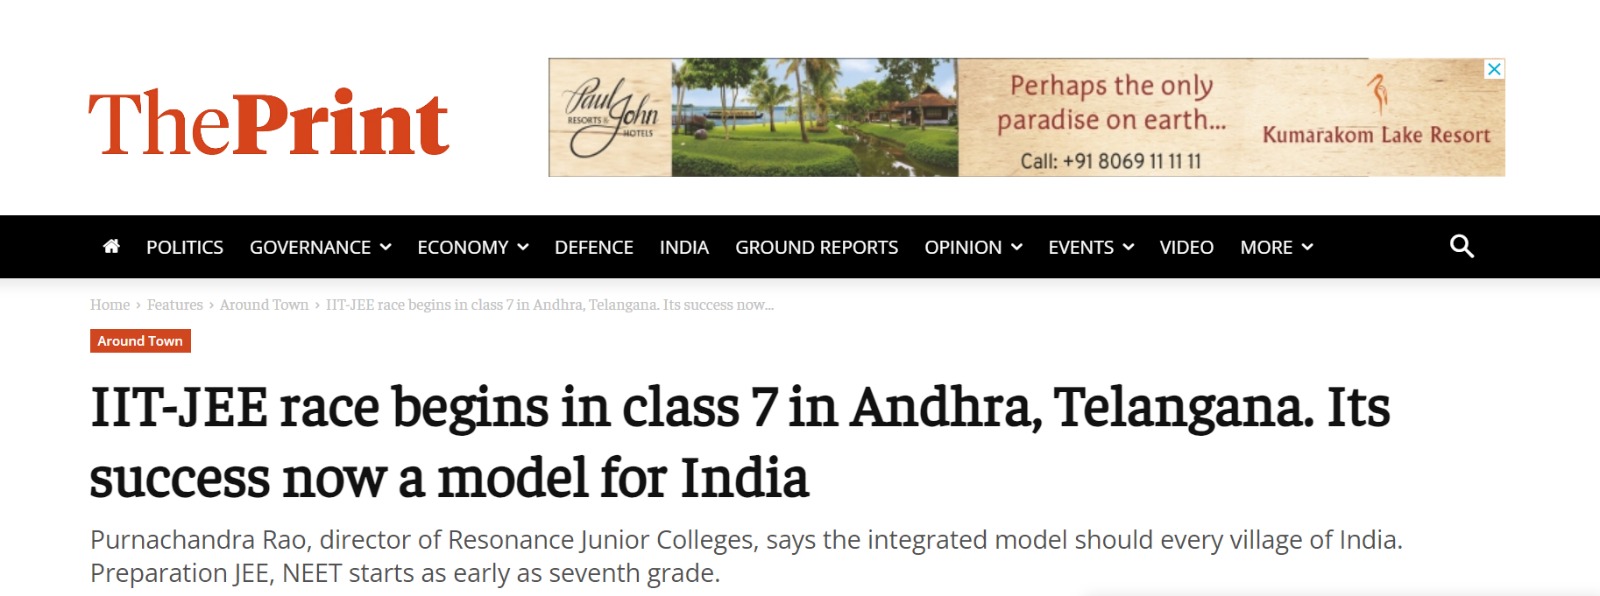 IIT-JEE race begins in class 7 in Andhra, Telangana. Its success now a model for India